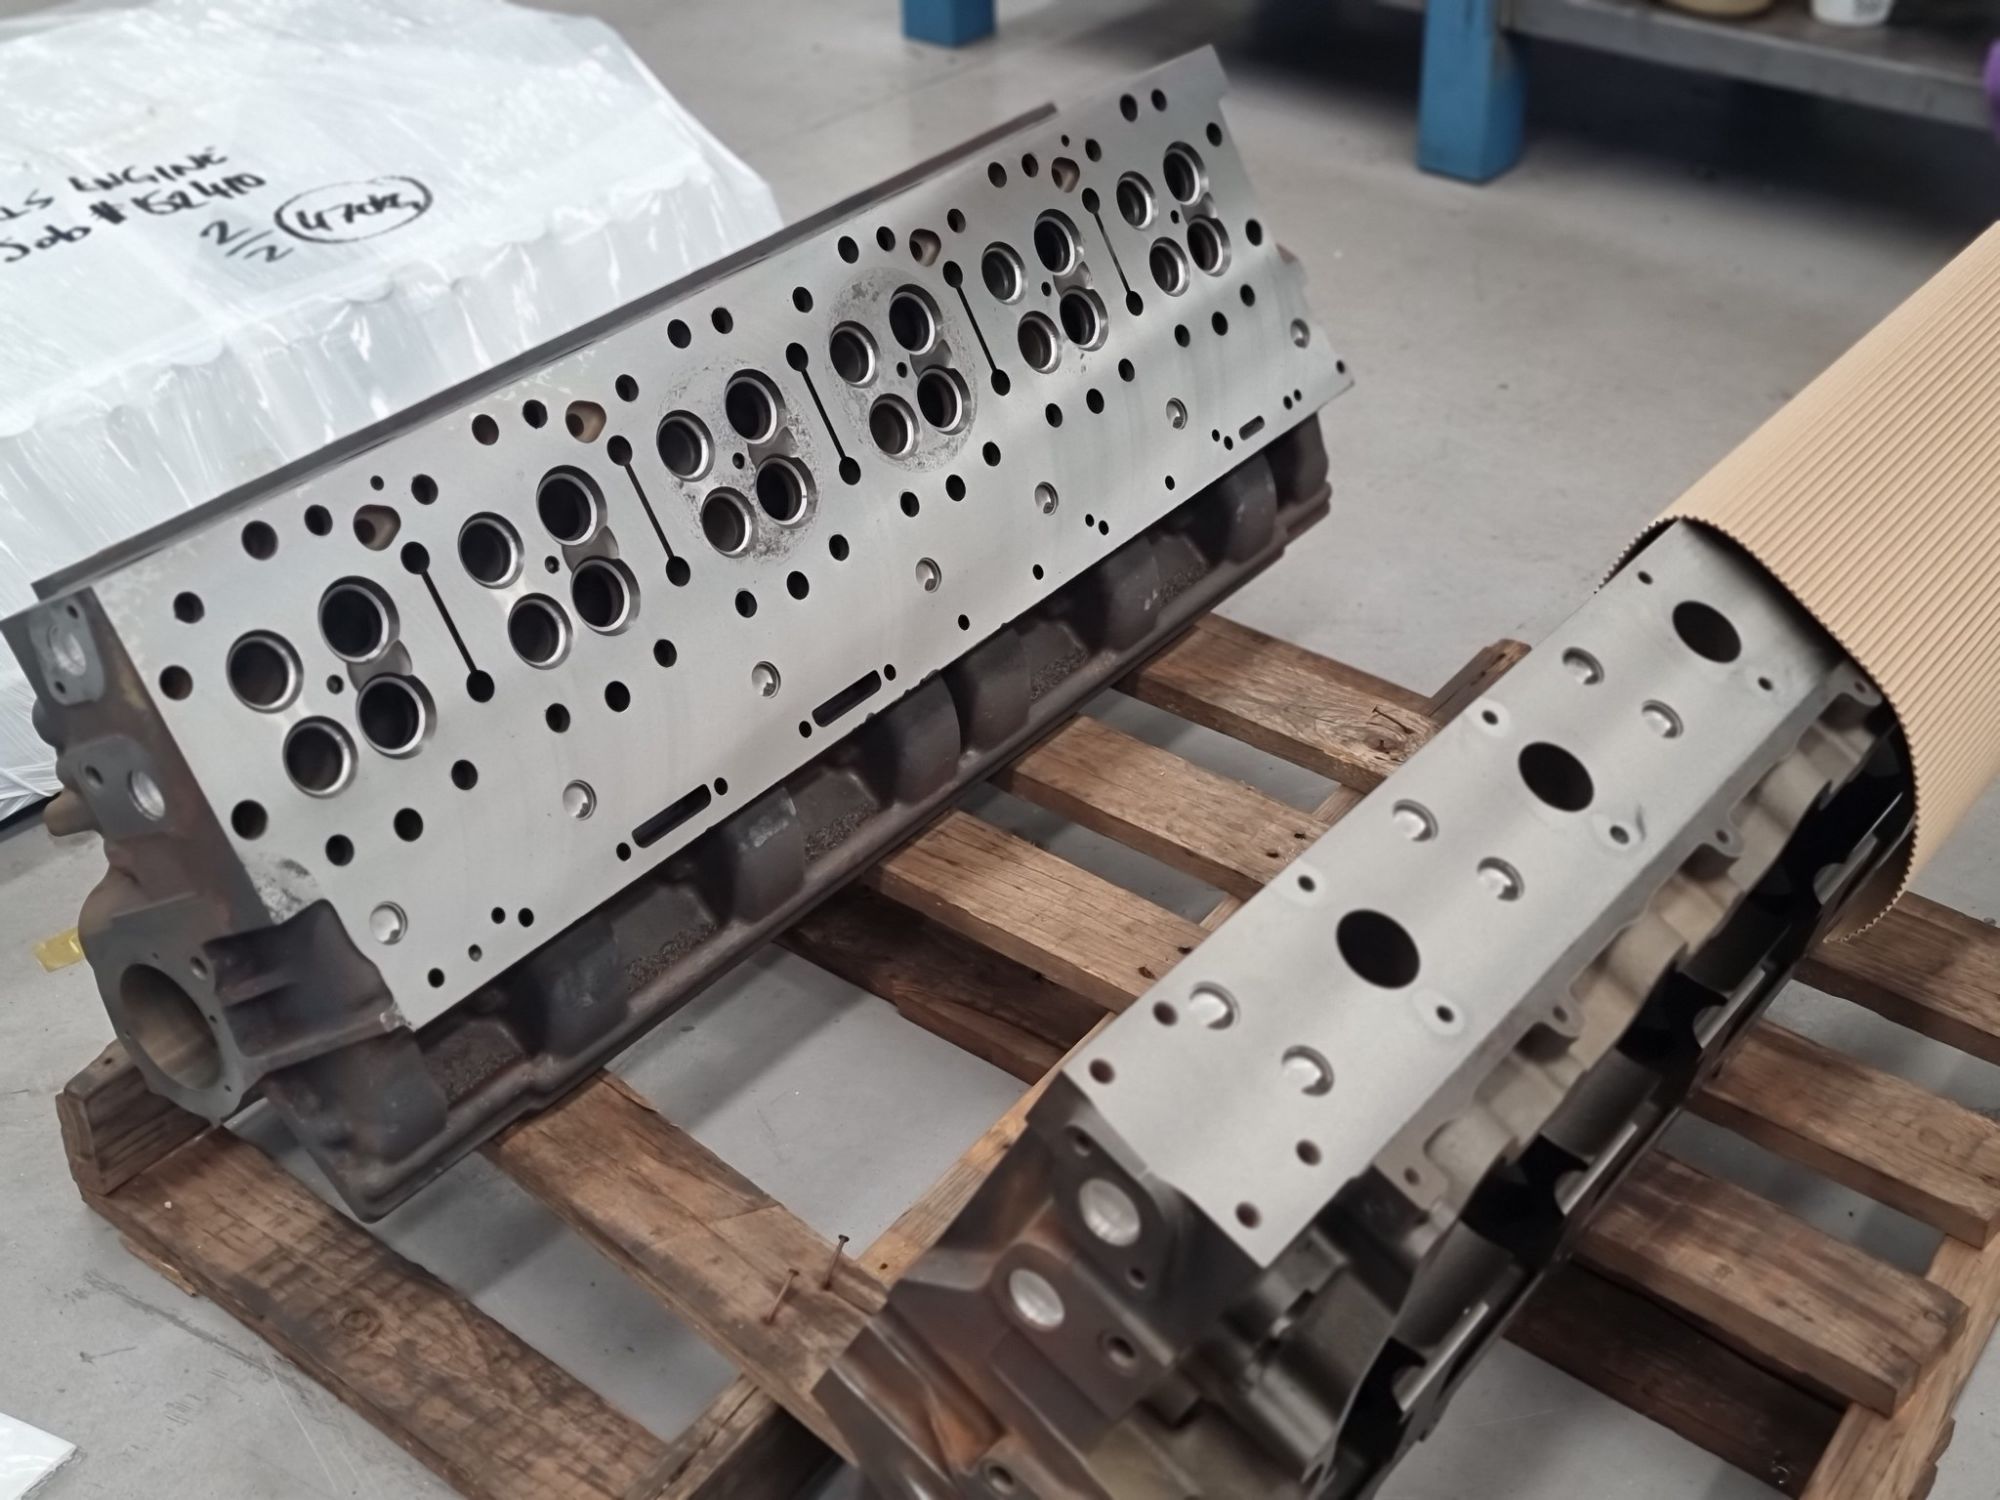 CaterpillarÂ® Used C27 Parts - Second Hand Cylinder Heads For Sale